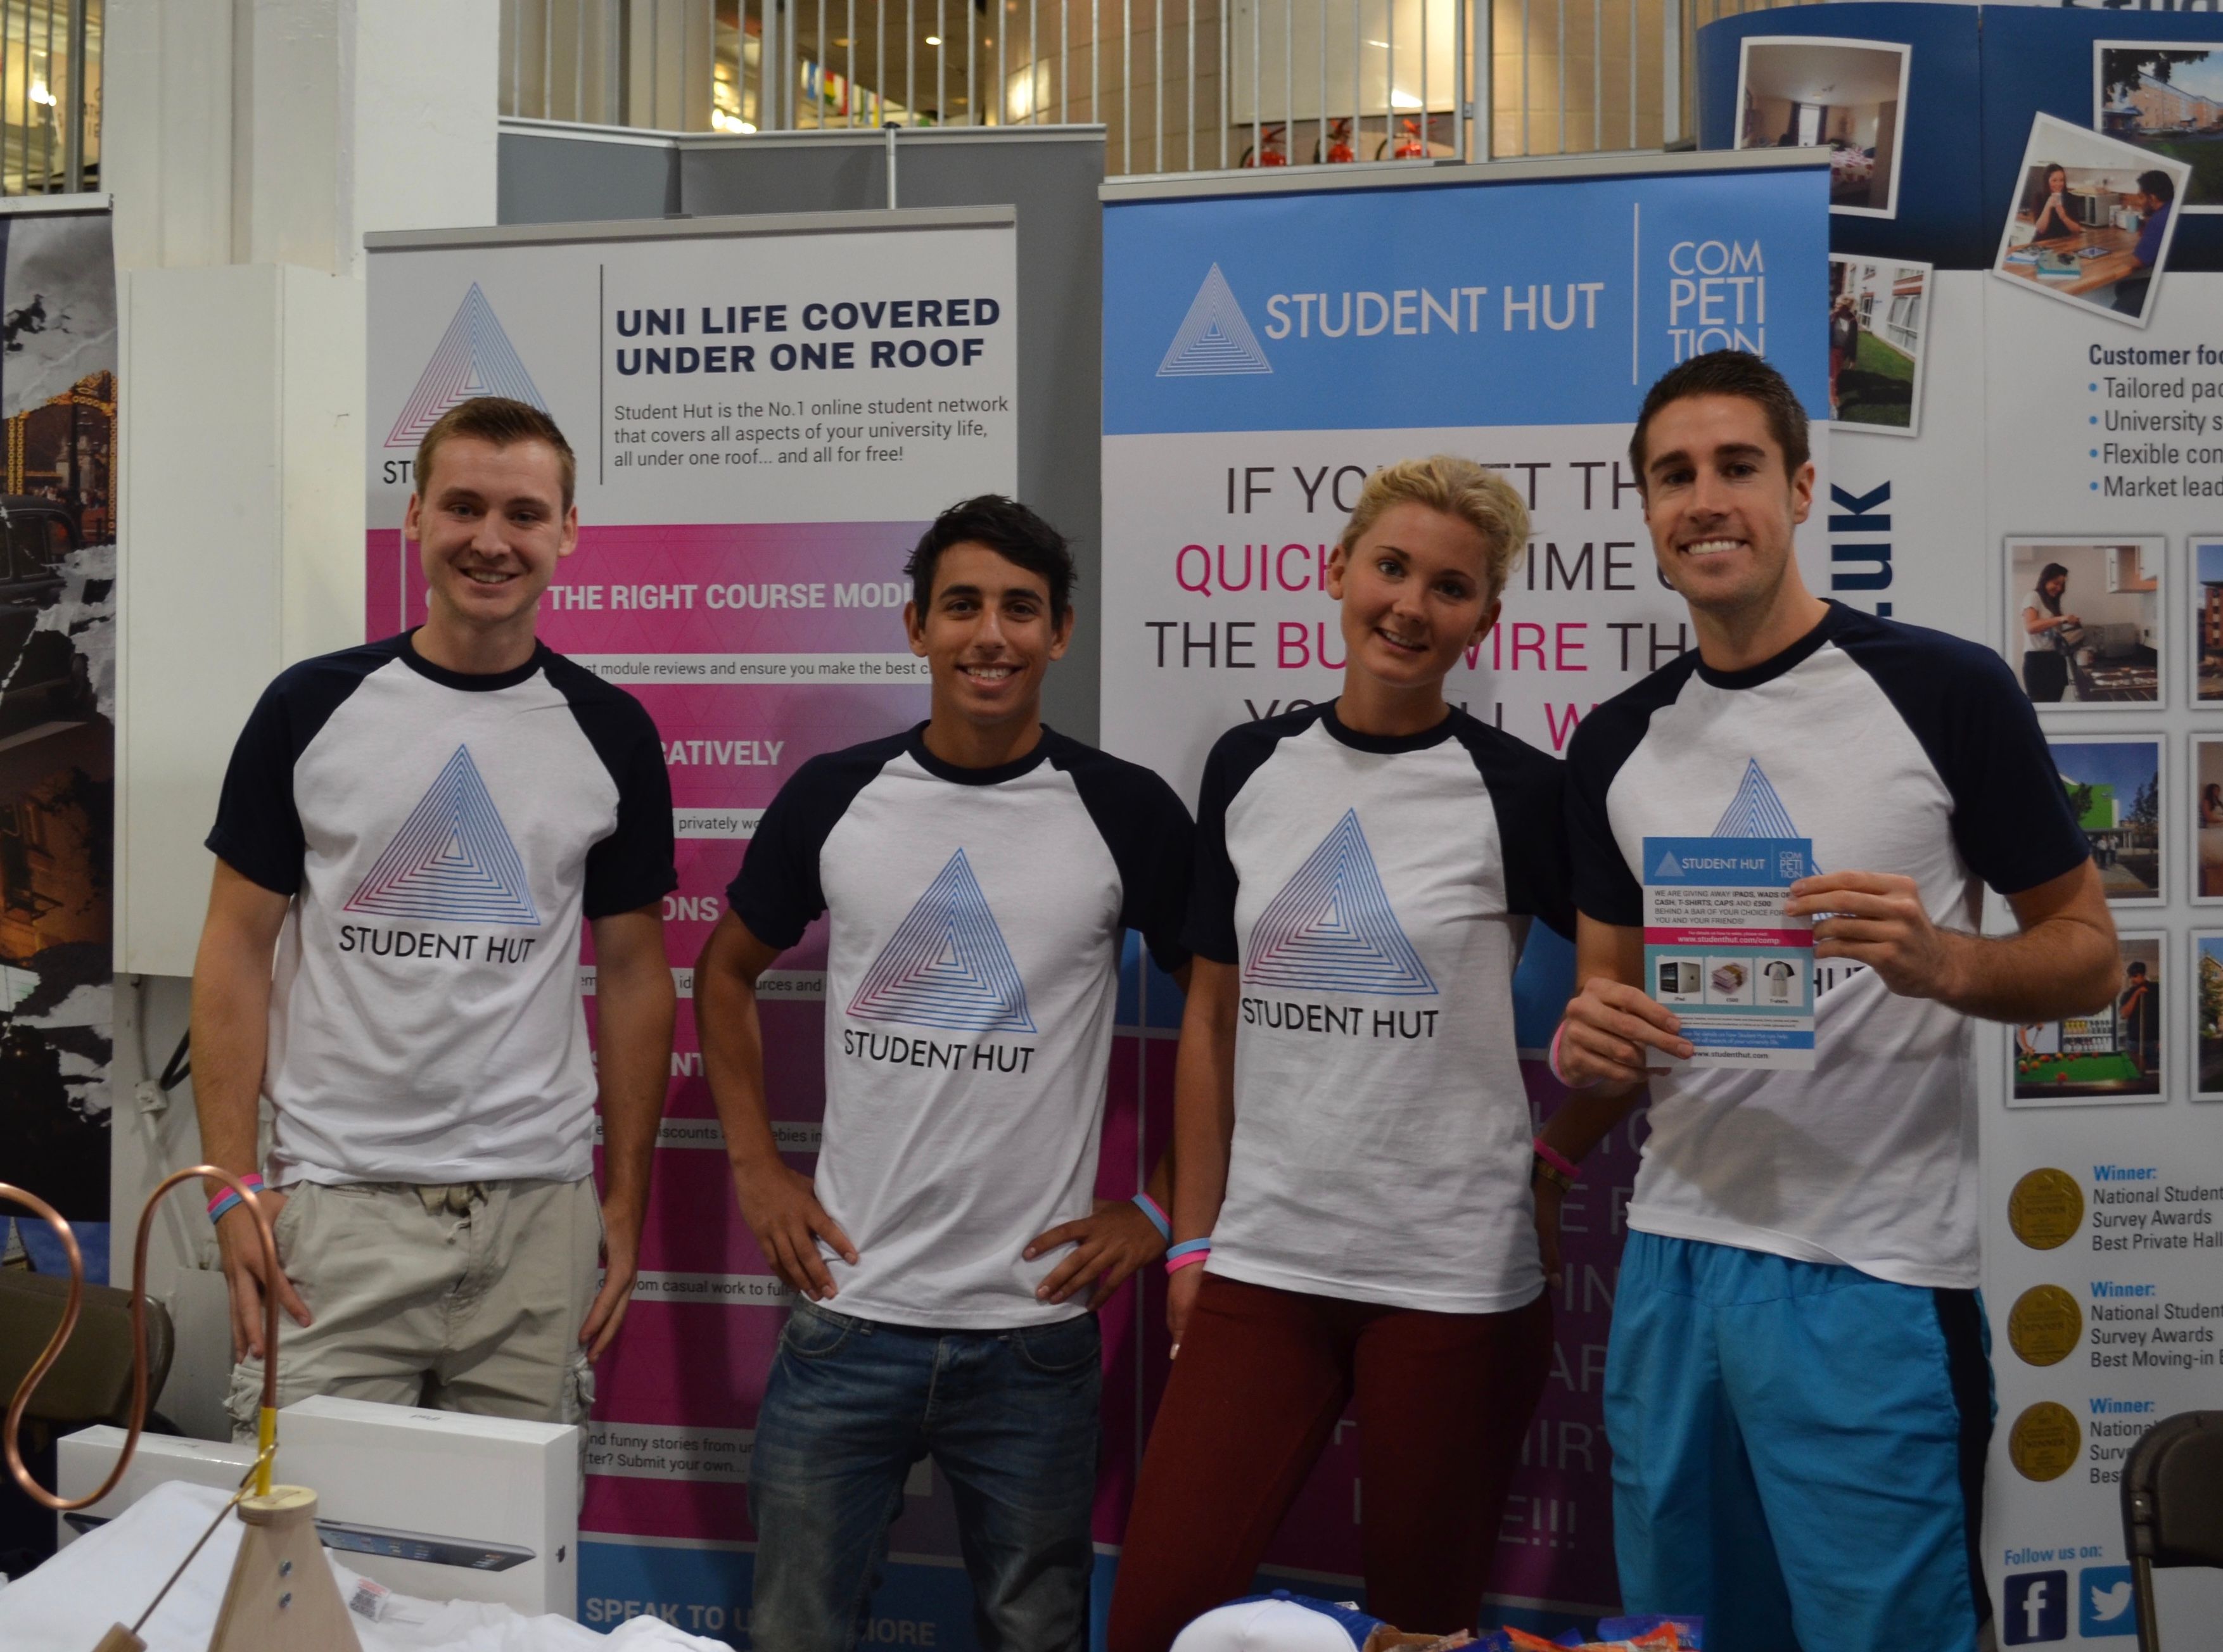 Four people, including Dan, wearing a Student Hut t-shirt with Student Hut banners behind them.